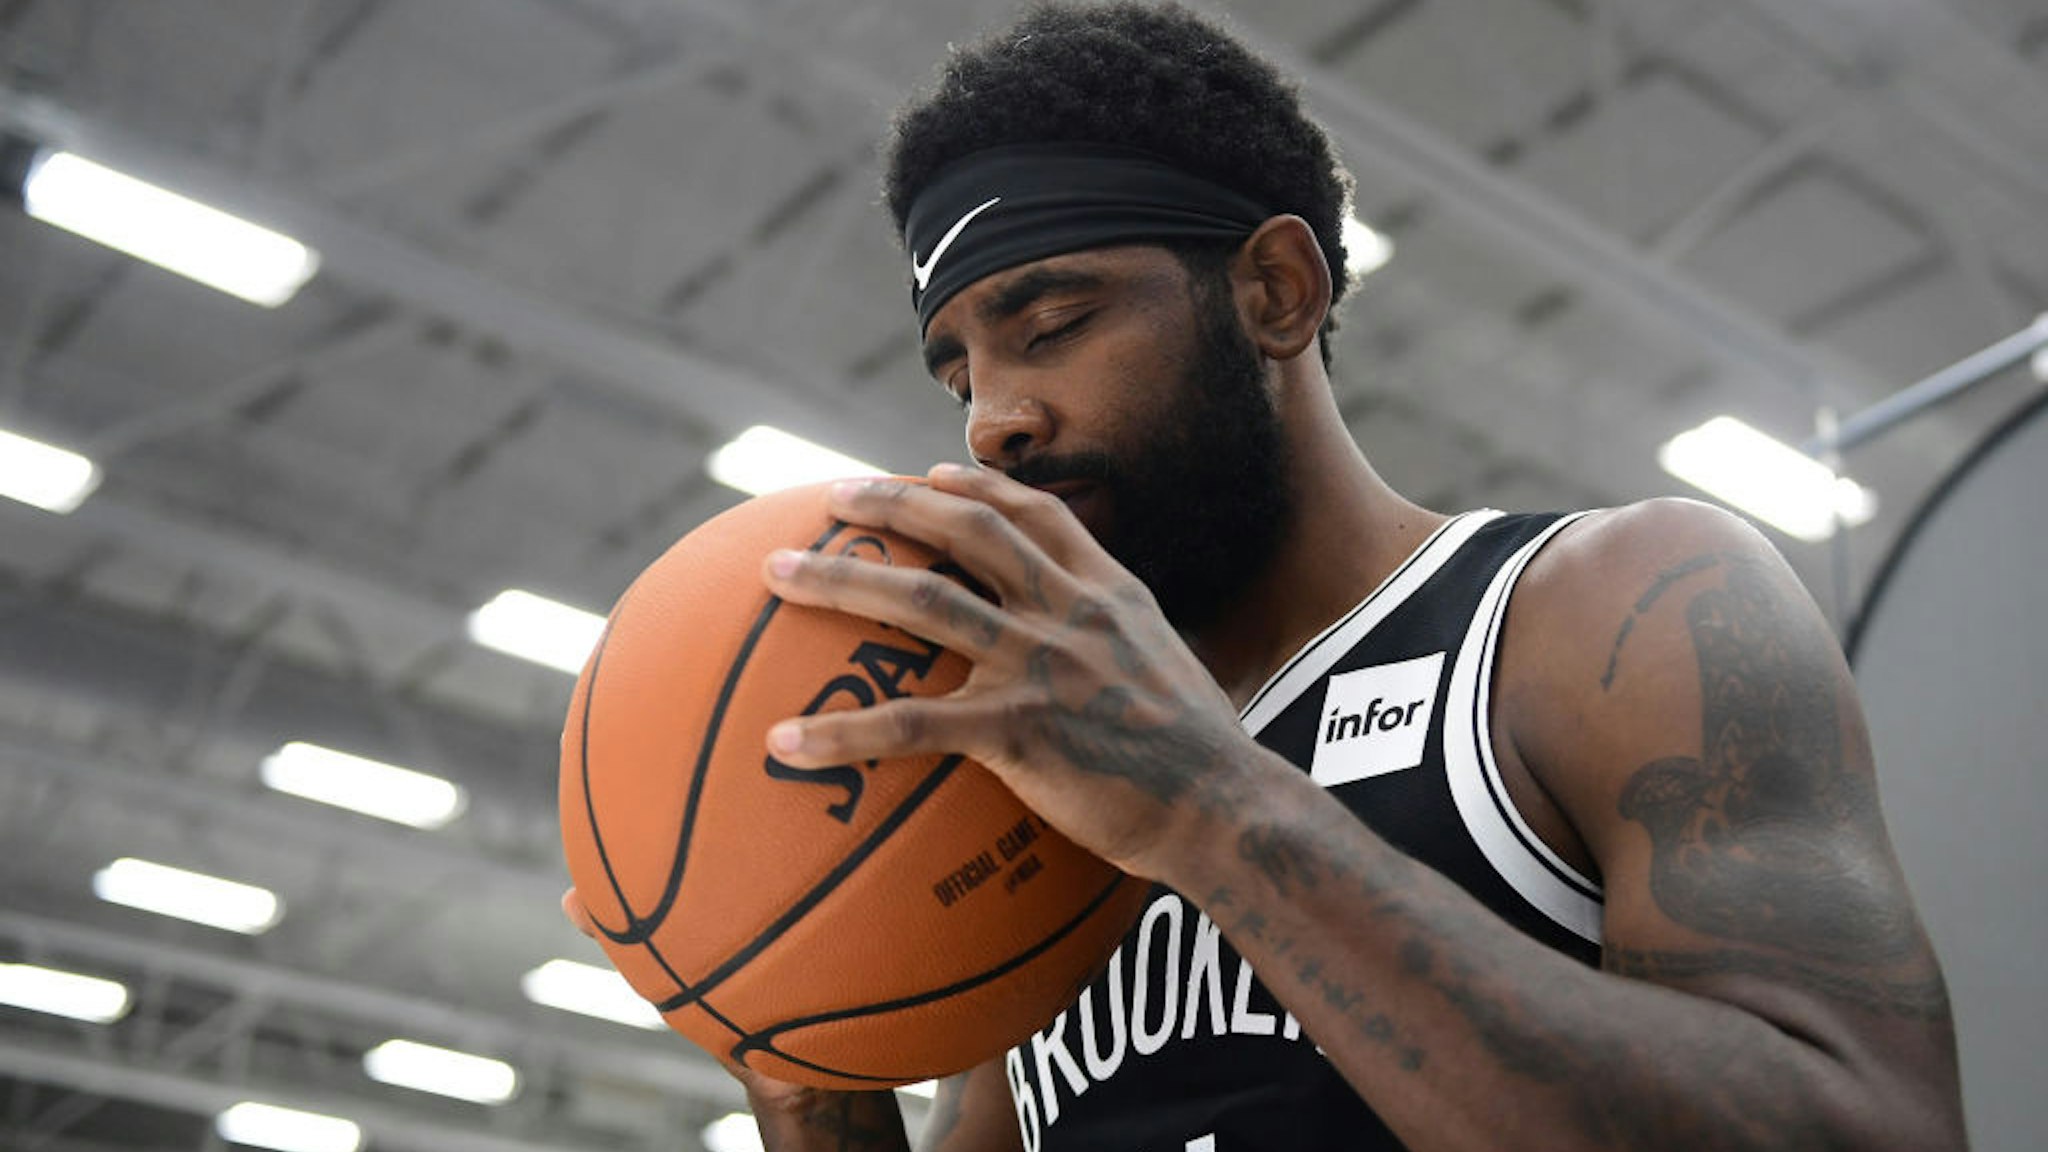 NEW YORK, NEW YORK - SEPTEMBER 27: Kyrie Irving #11 of the Brooklyn Nets poses for a photograph during Media Day at HSS Training Center on September 27, 2019 in the Brooklyn borough of New York City. NOTE TO USER: User expressly acknowledges and agrees that, by downloading and or using this photograph, User is consenting to the terms and conditions of the Getty Images License Agreement. (Photo by Emilee Chinn/Getty Images)